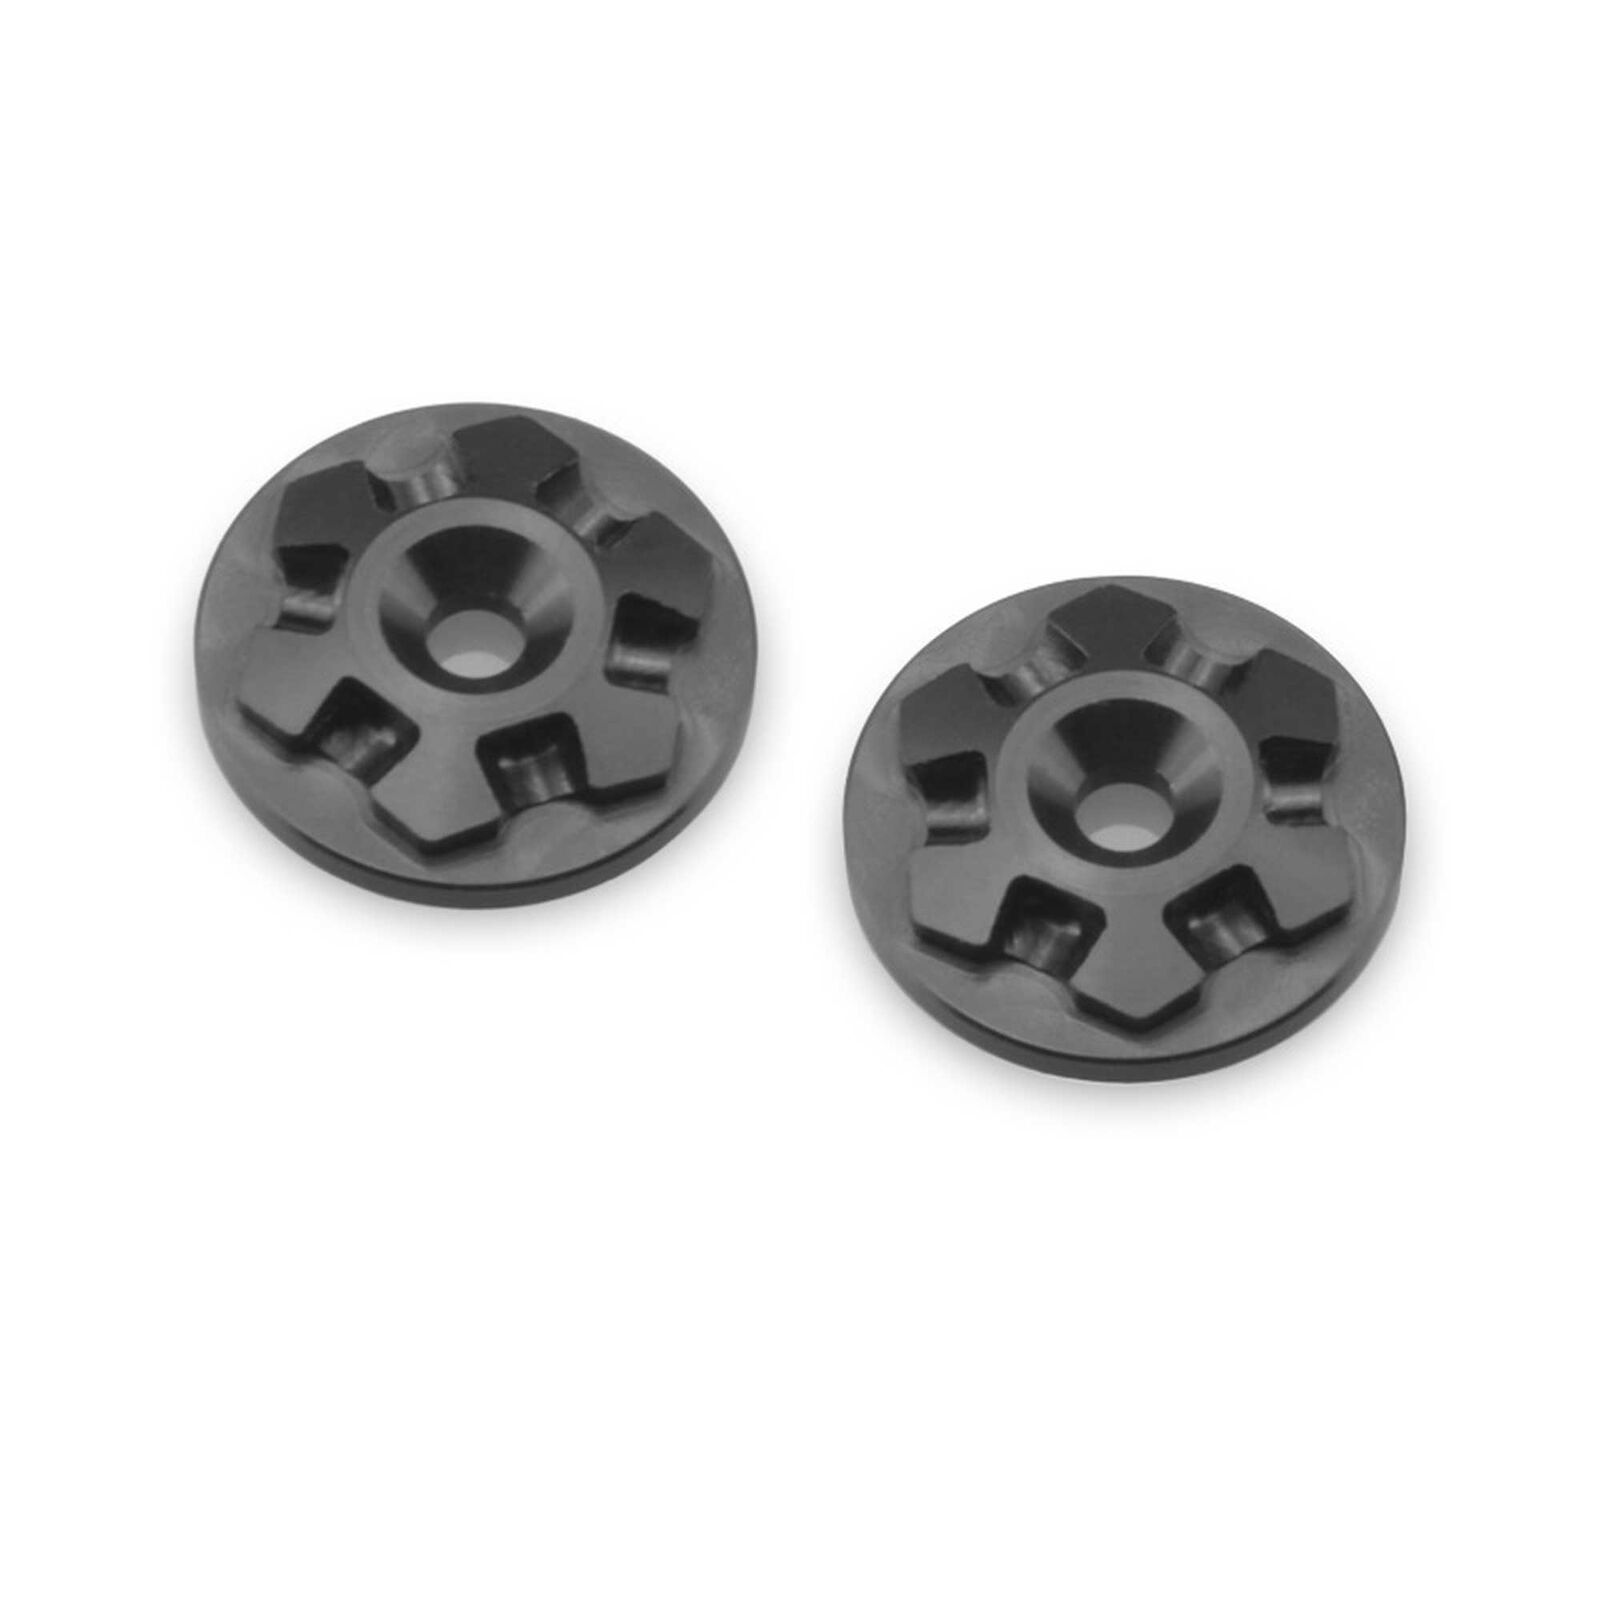 RM2 Clover Large Flange 1/8 Wing Buttons, Black (2)